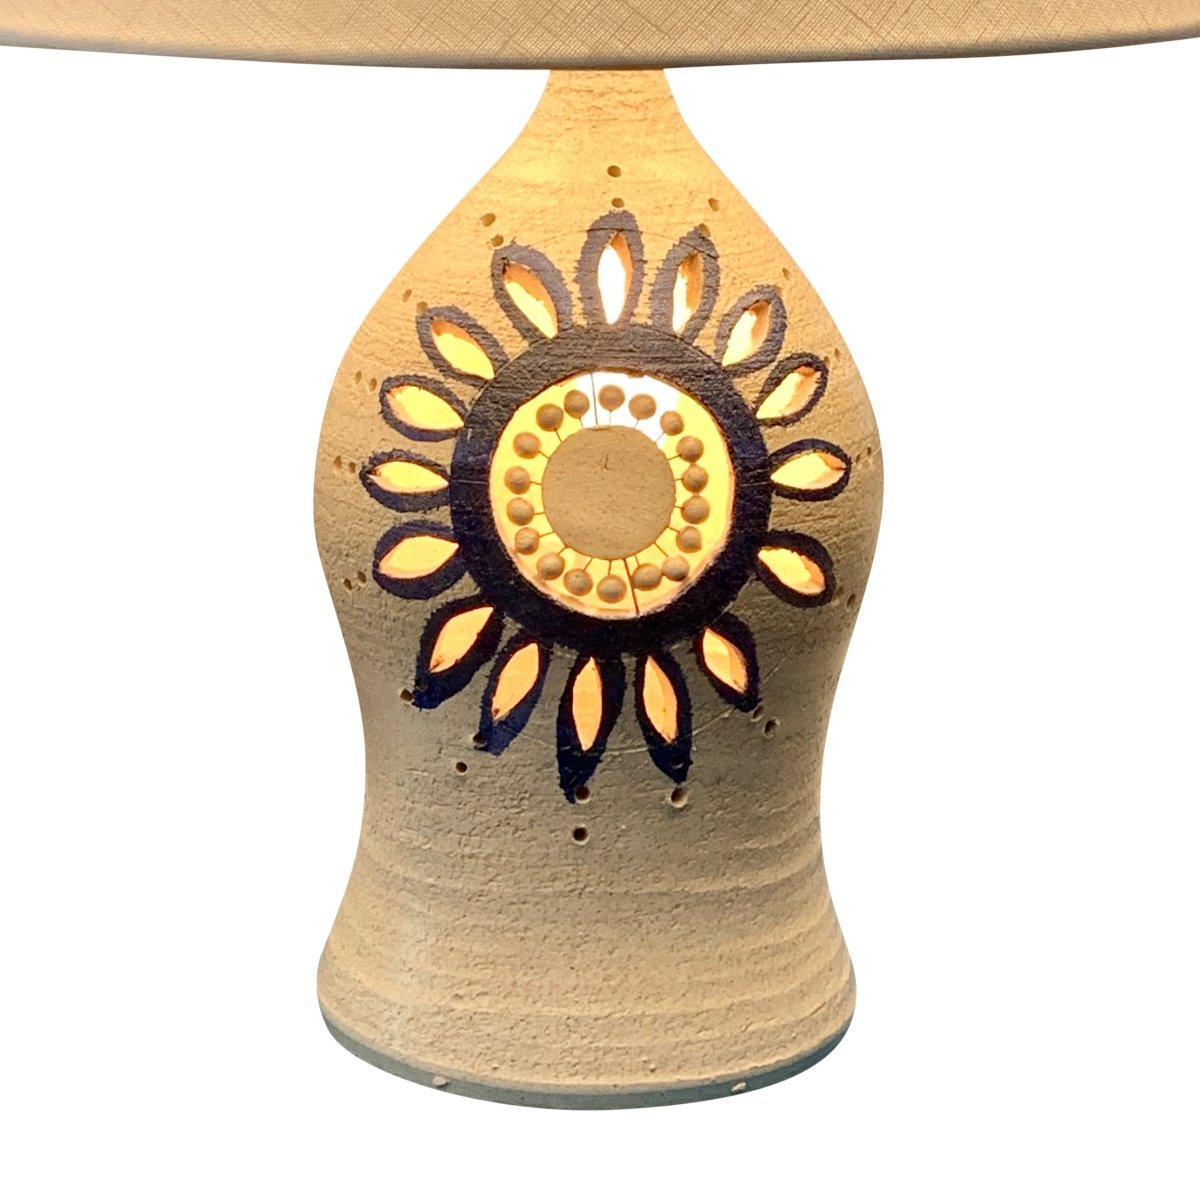 Vintage Georges Pelletier Lamp with White Daisy Motif - Homebody Denver